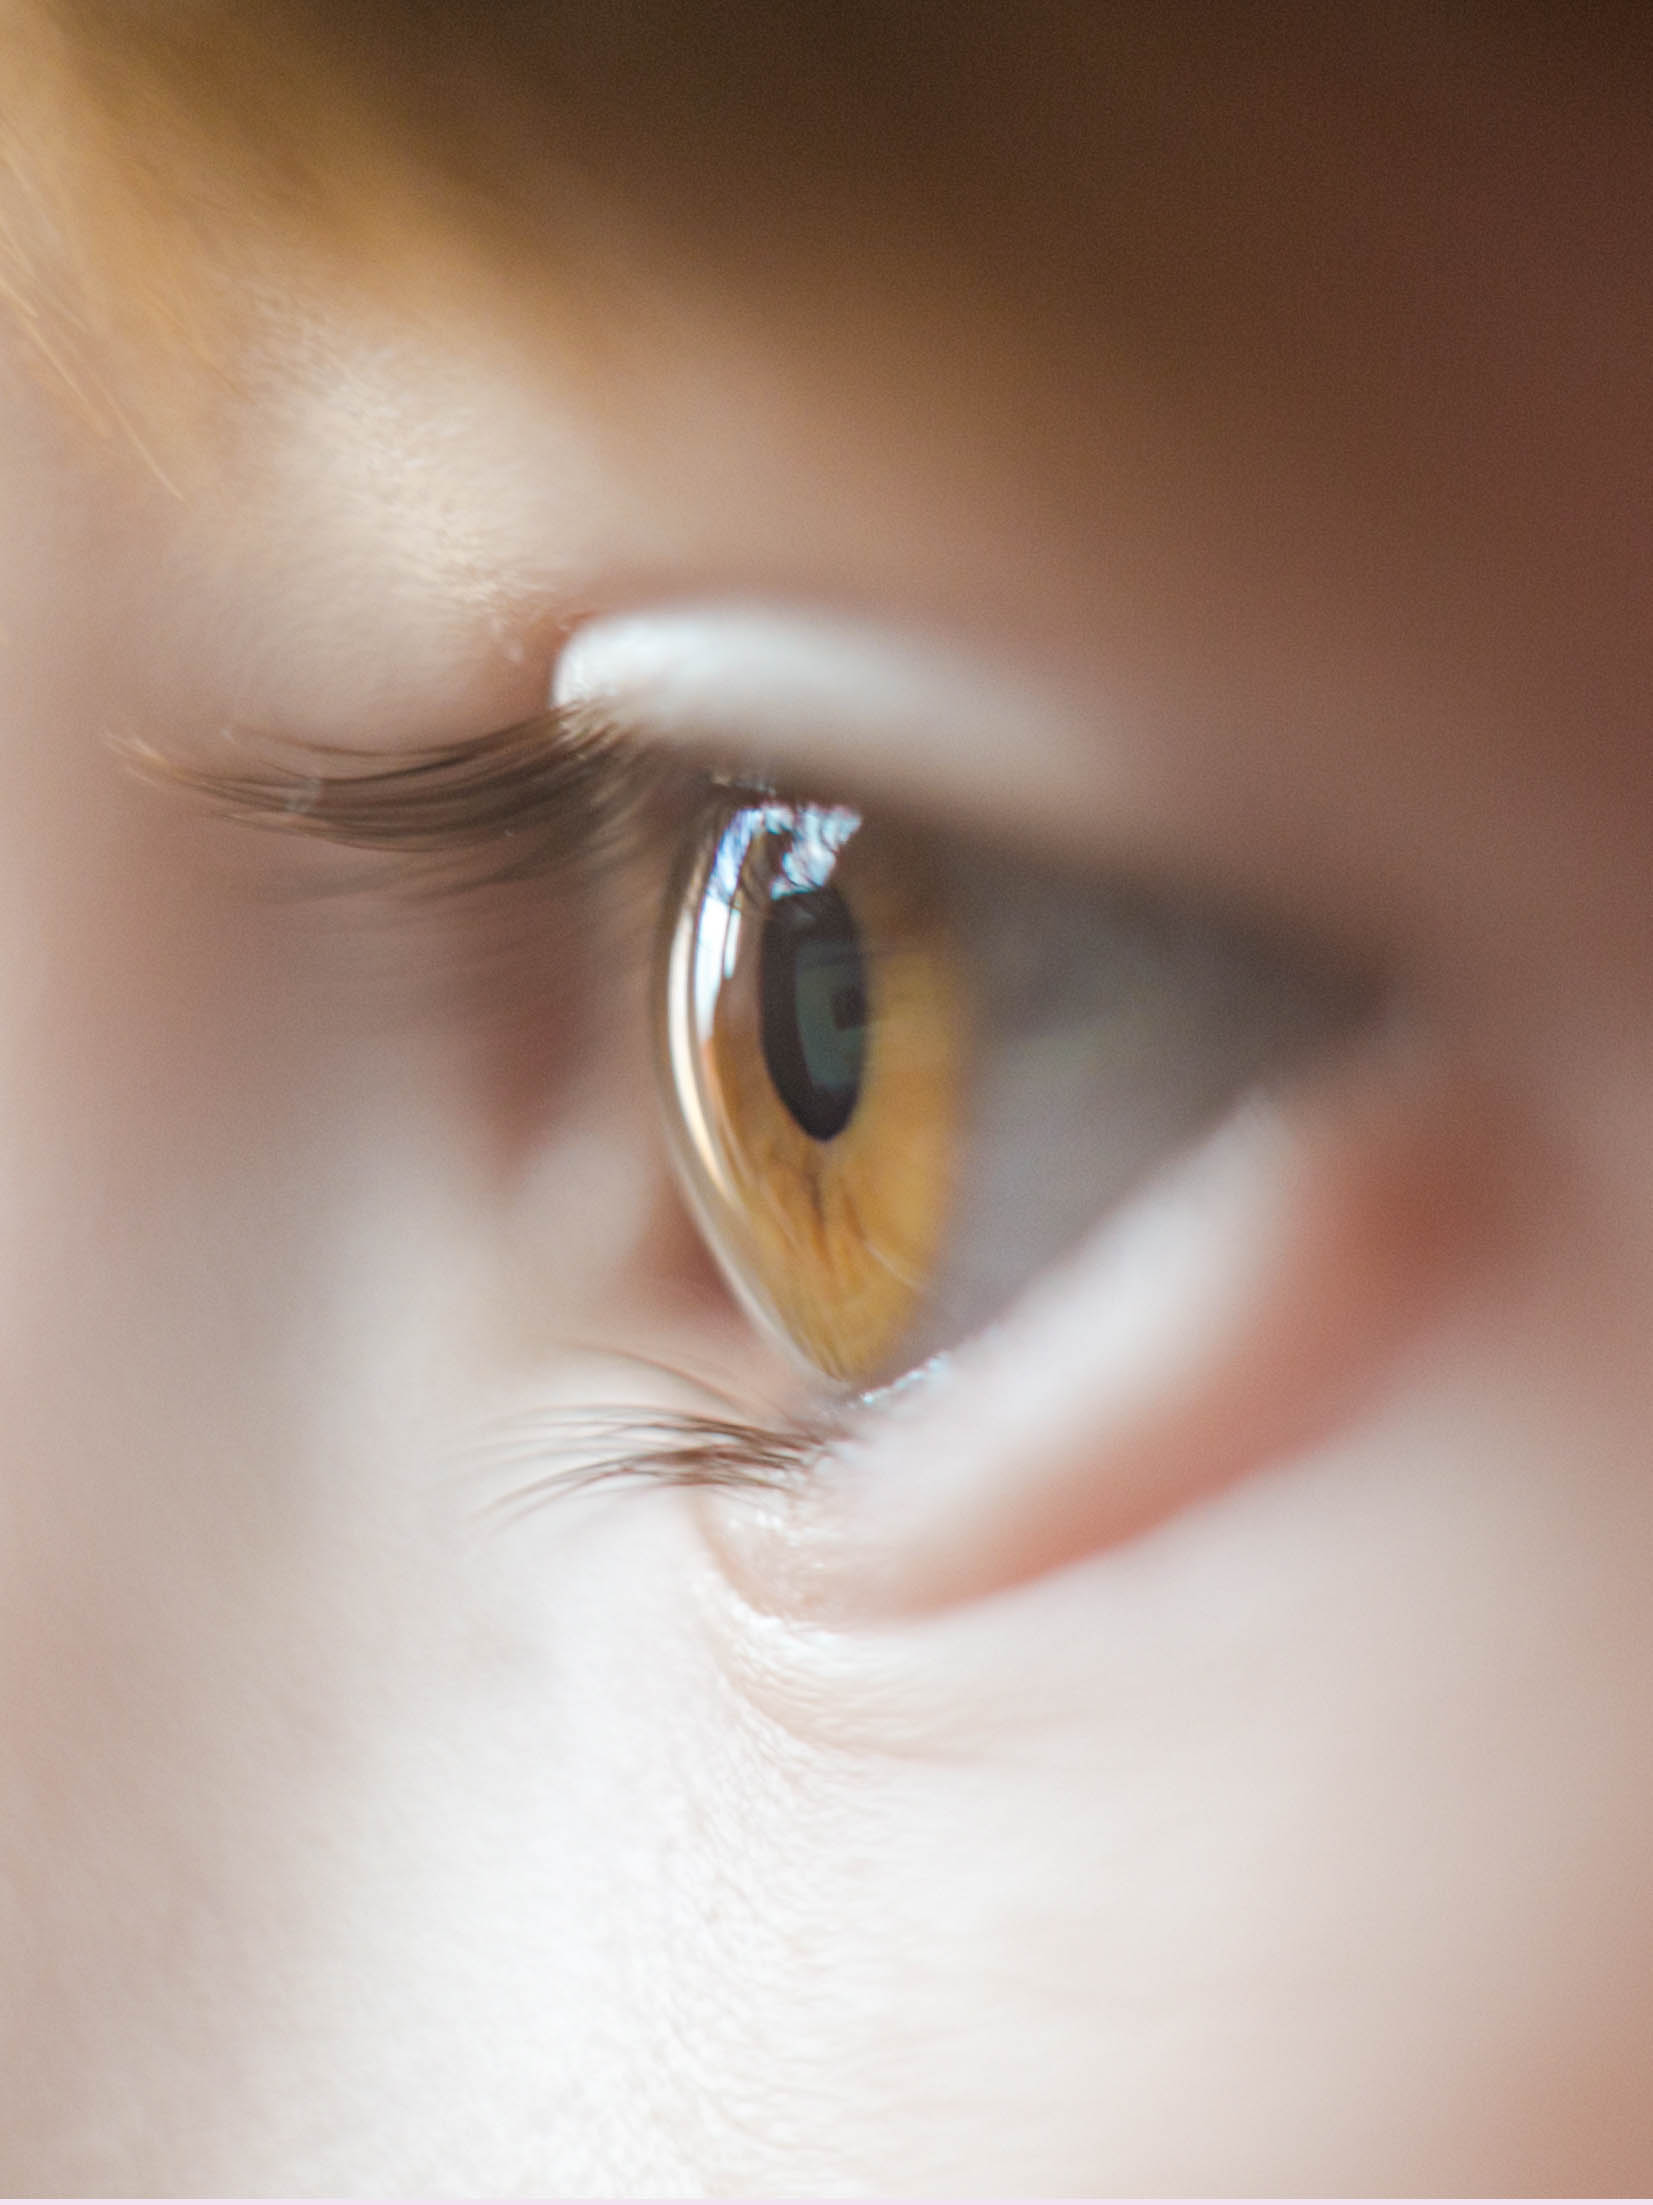 closeup of the eye of a child